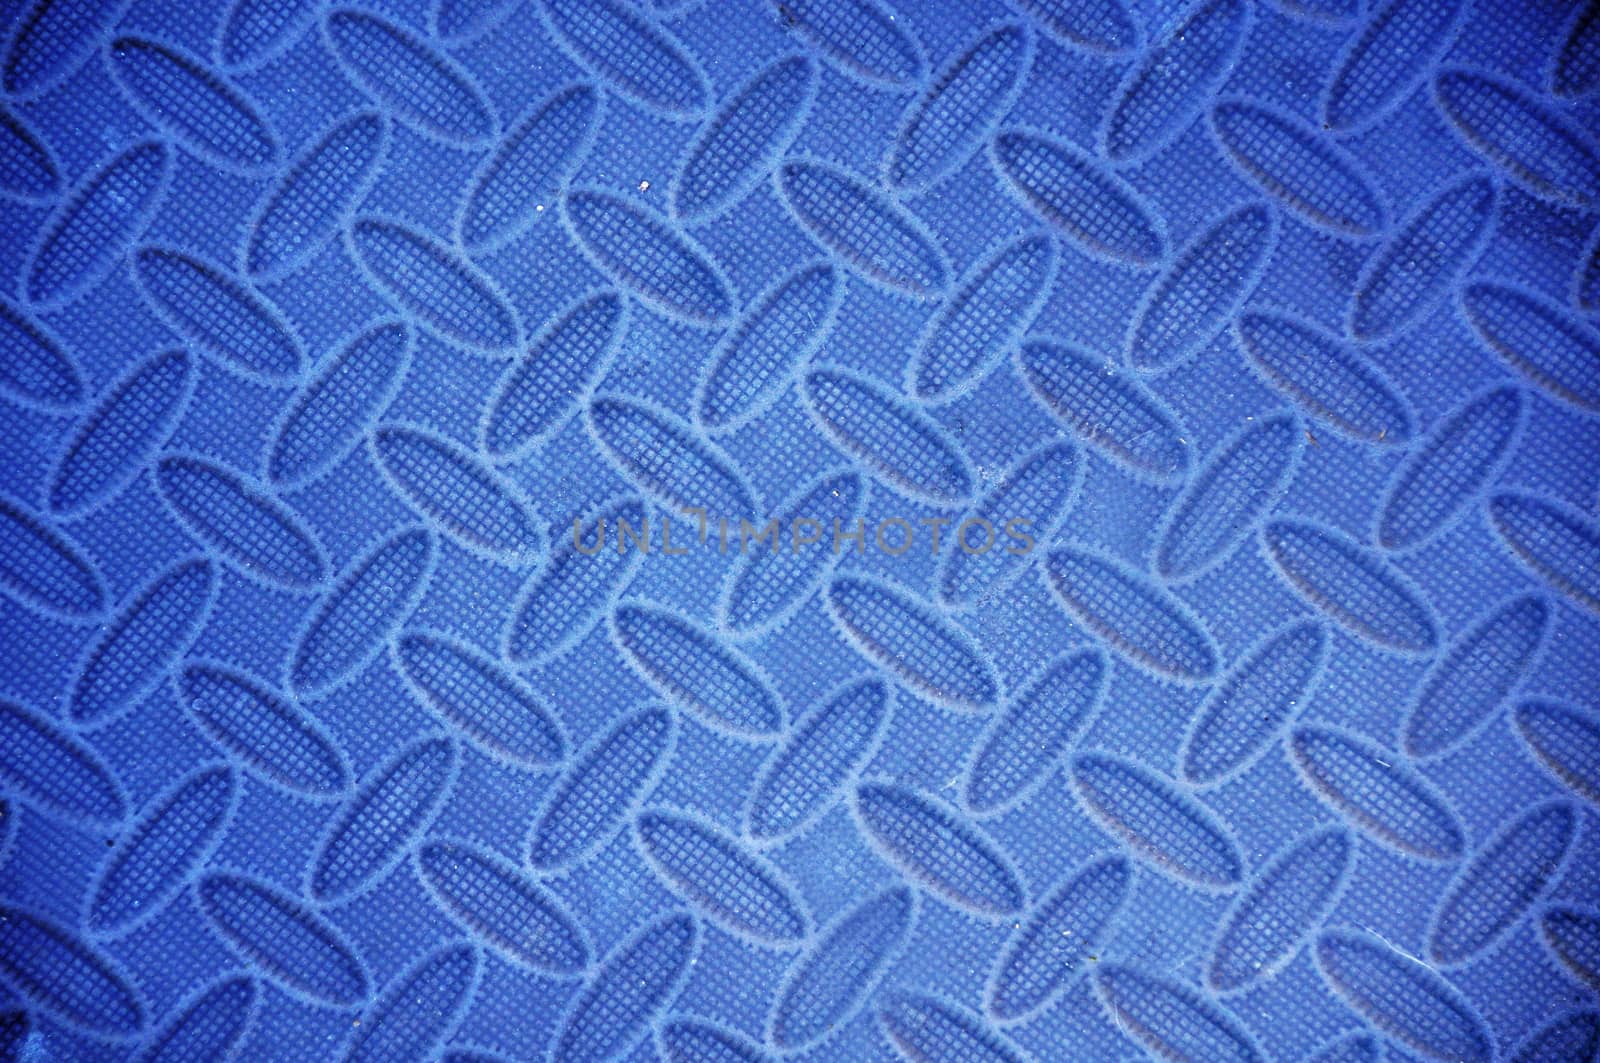 plastic fake metal texture by AlessandraSuppo